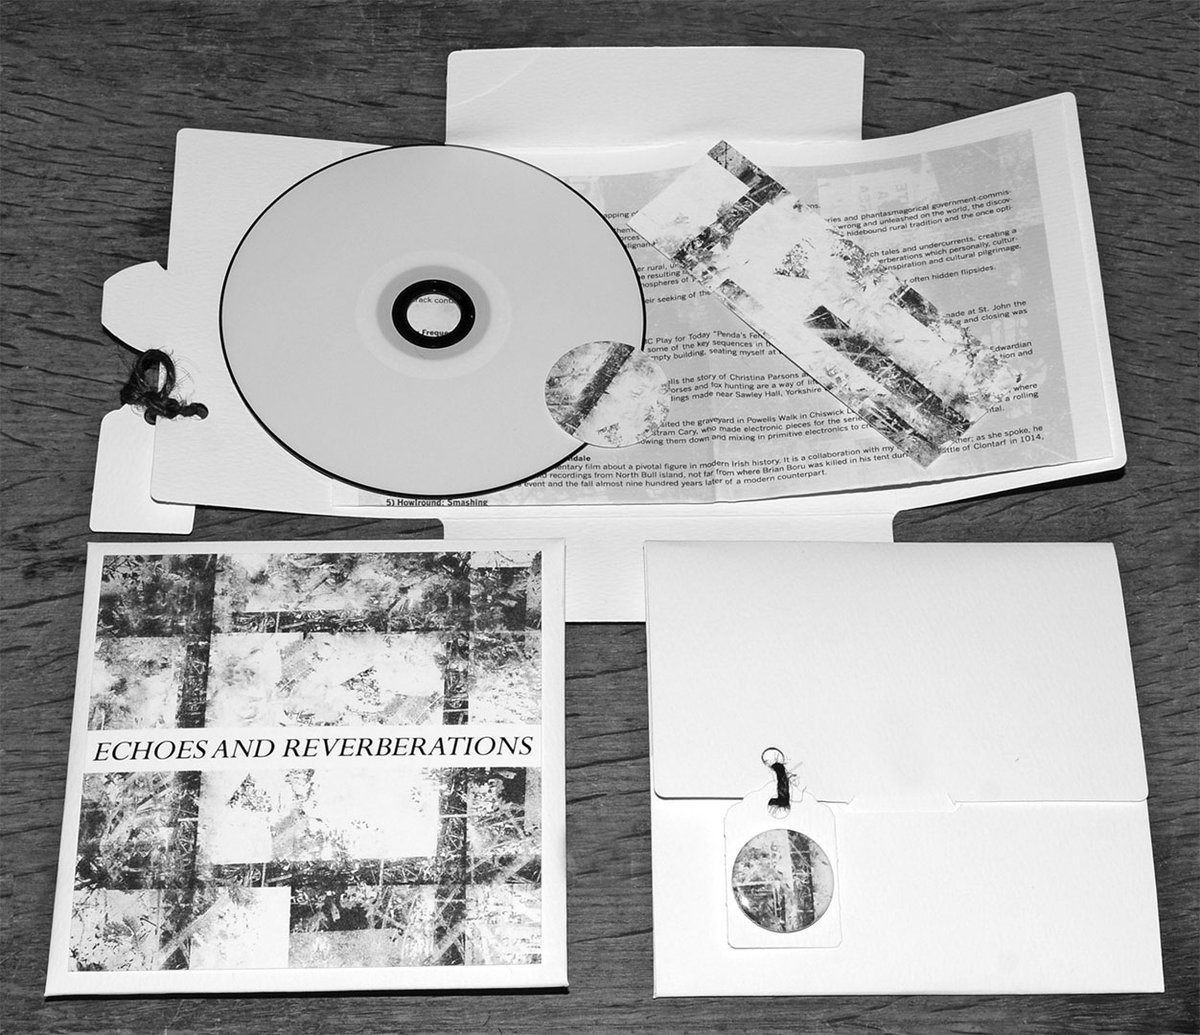 There's a sale at the A Year In The Country Shop and Bandcamp which includes the last copies of the CDs, so if you've ever wanted to explore the spectral will-o'the-wisps of the landscape's hidden echoes and reverberations then now would be the time #FolkloreThursday #hauntology